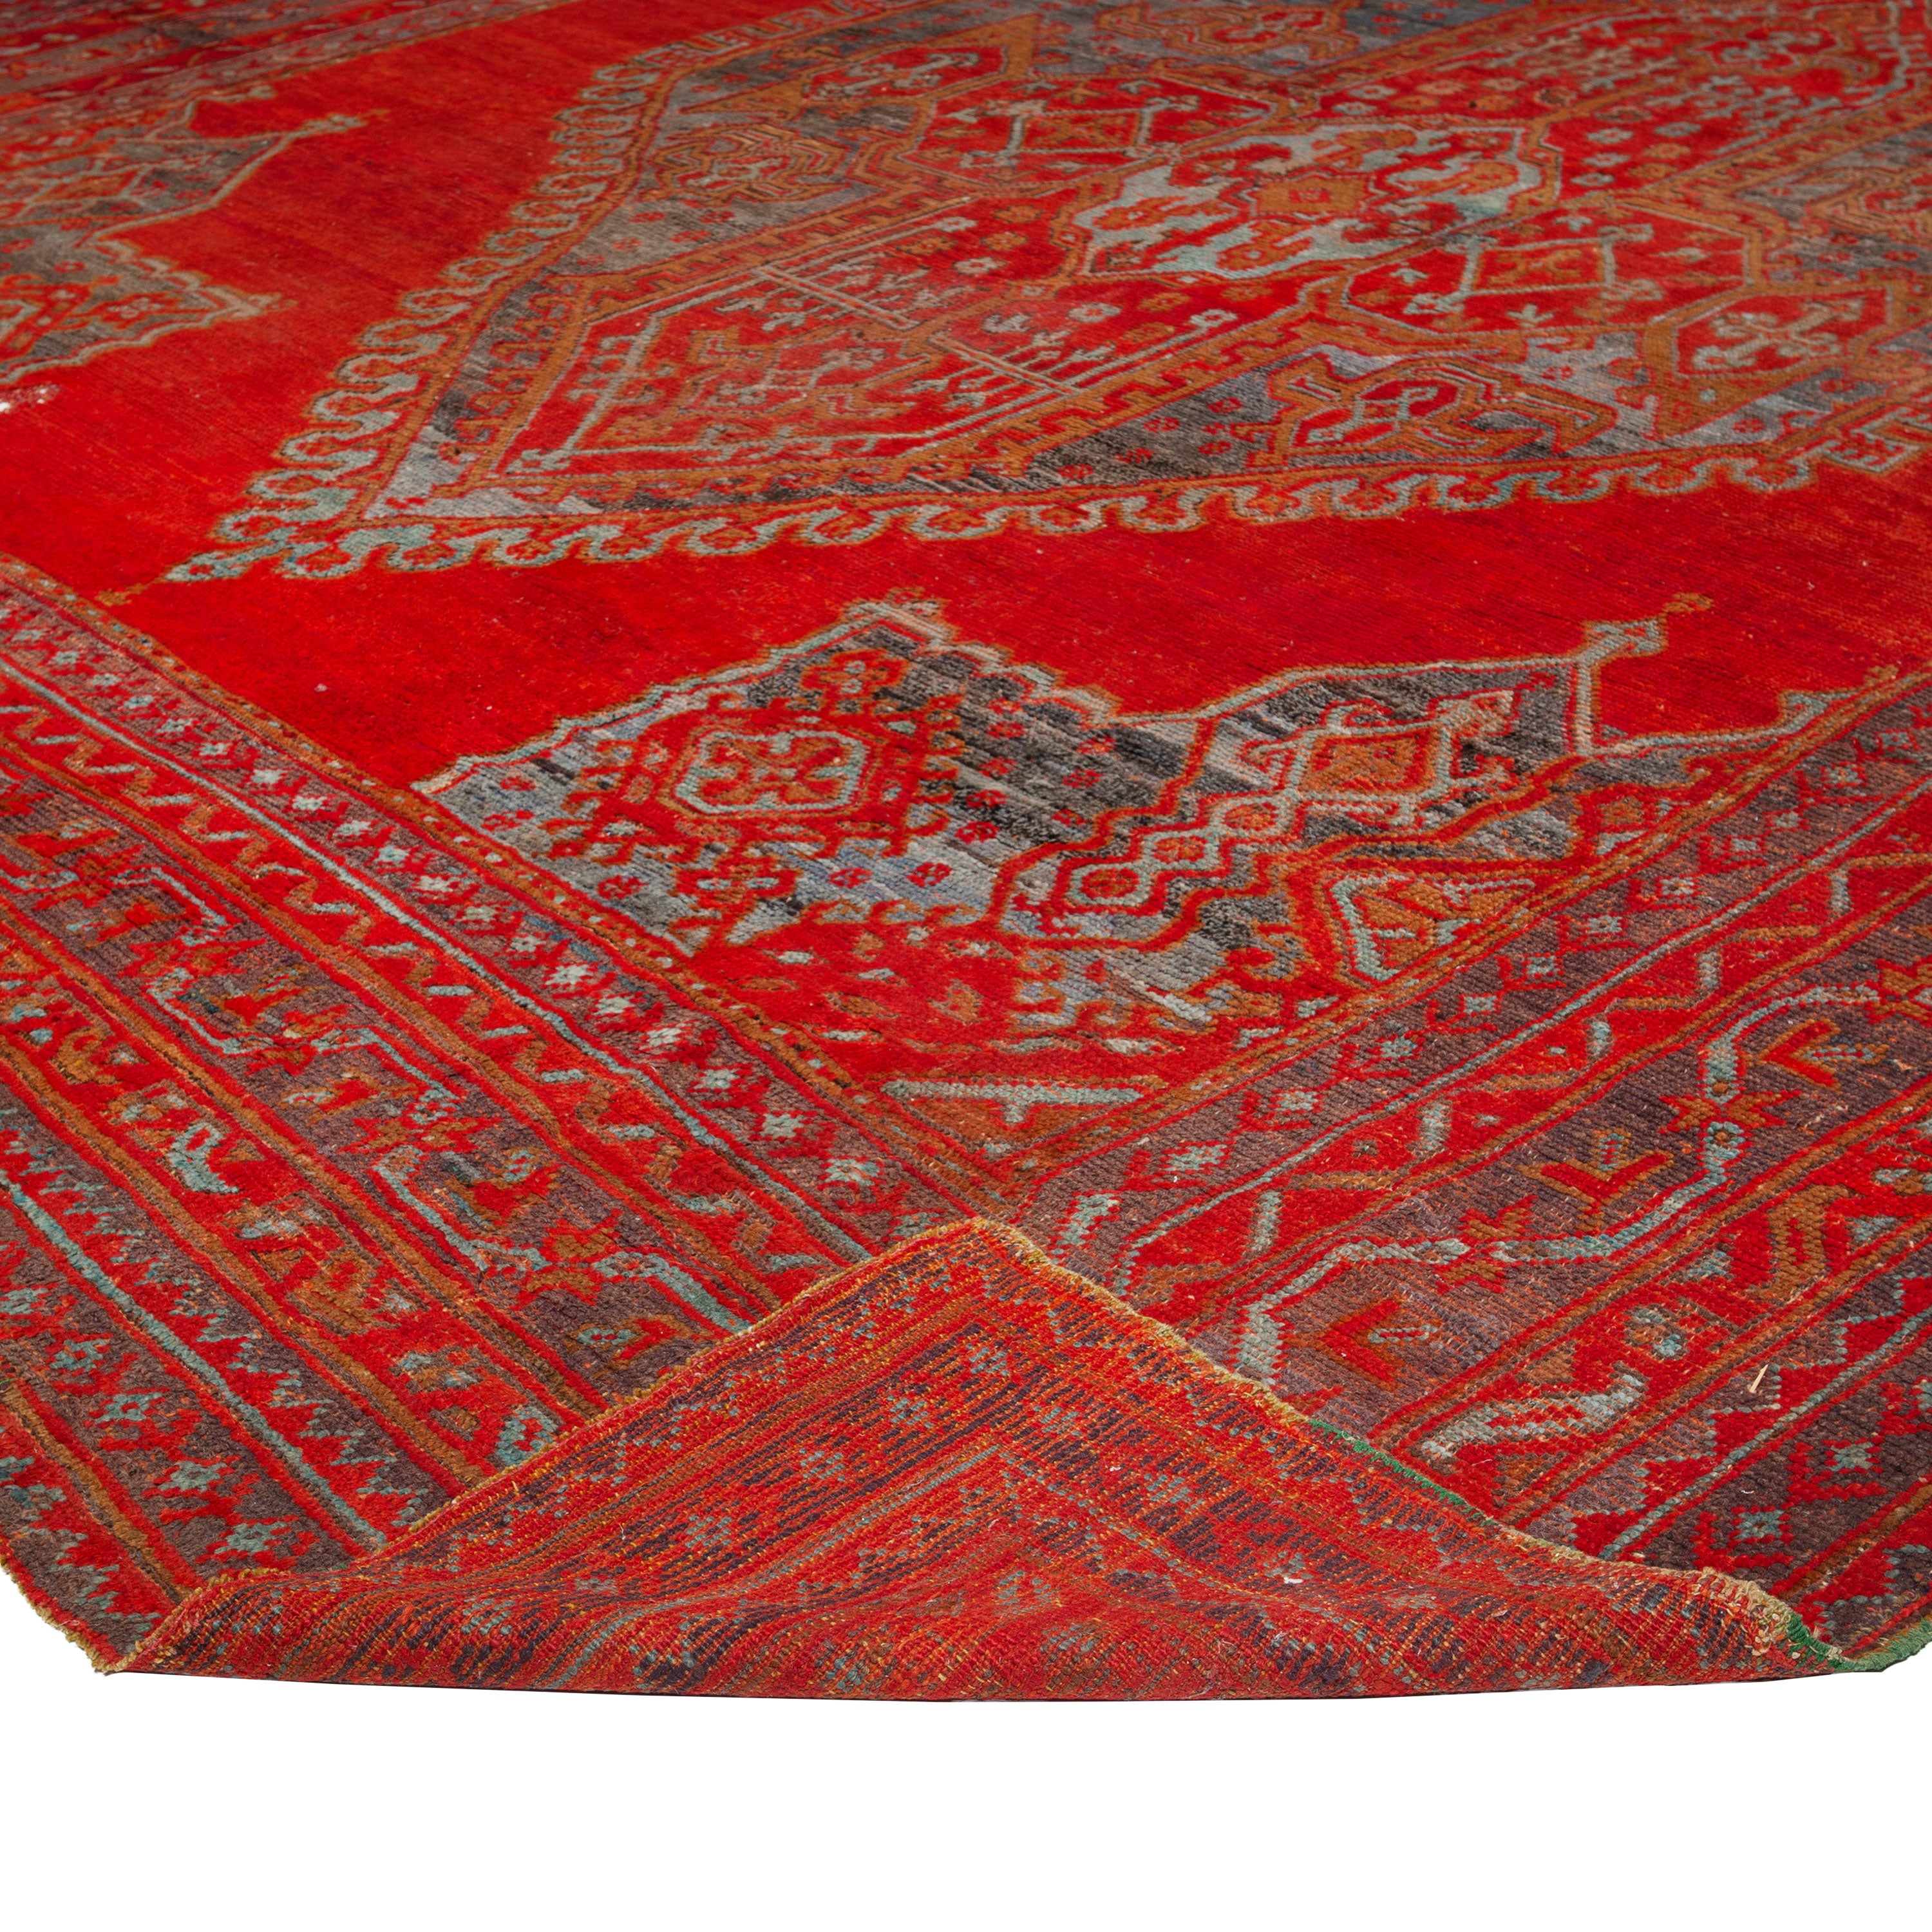 Red Vintage Traditional Anatolian Wool Rug - 13'6" x 16'2"